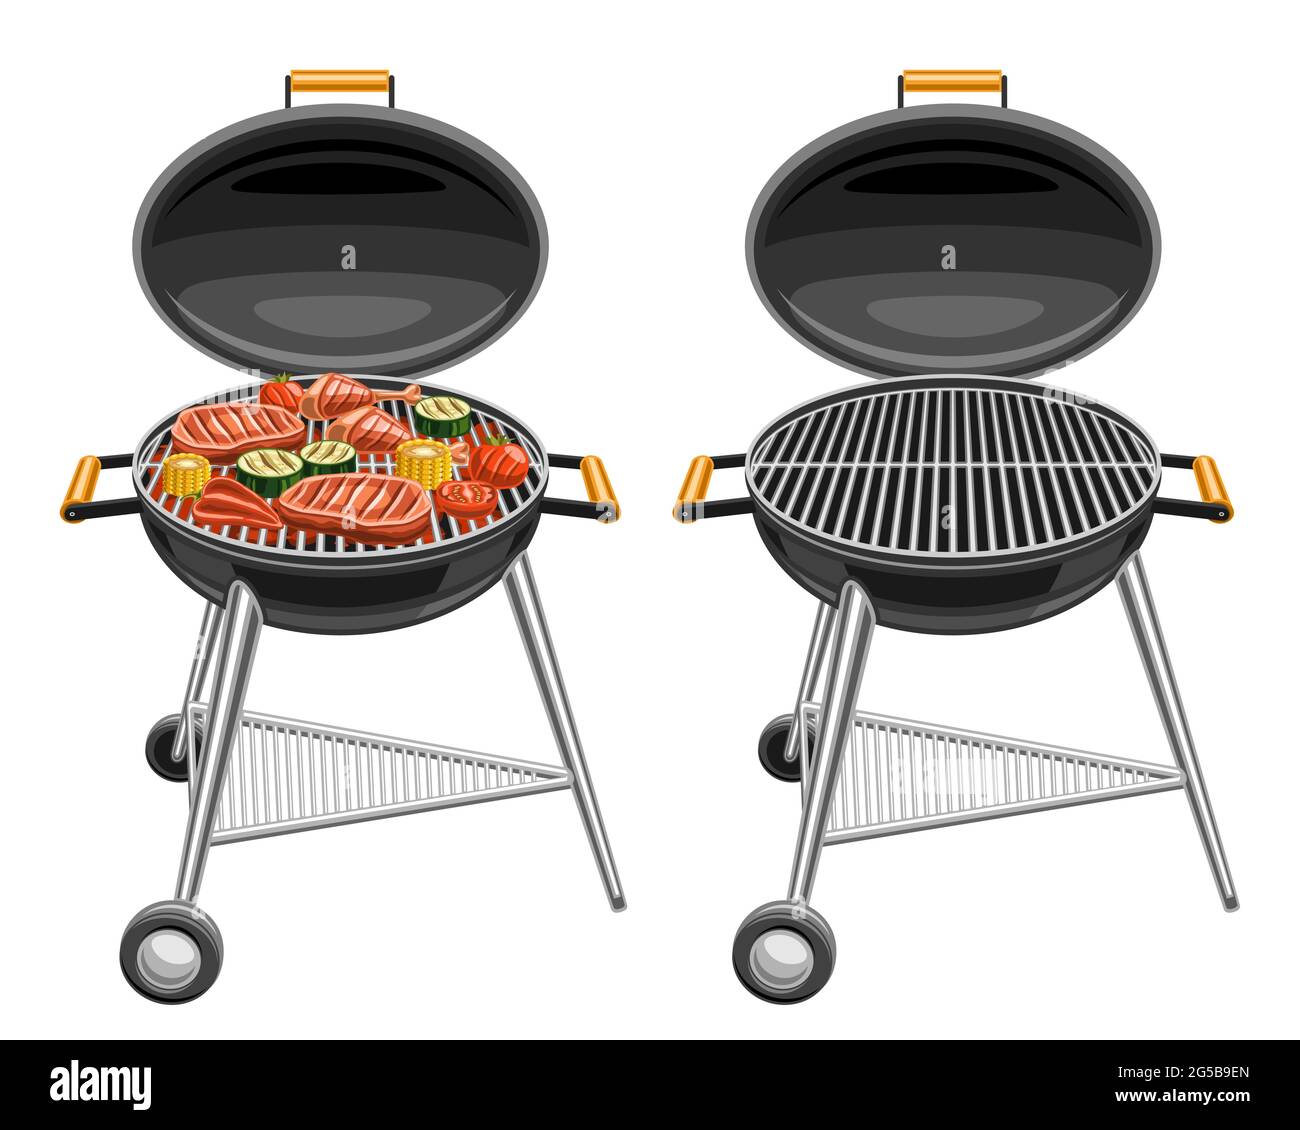 Vector illustrations of Barbecue Grills, bbq grill with roasted pork steaks and tasty grilled vegetables, isolated round barbeque with empty grate on Stock Vector